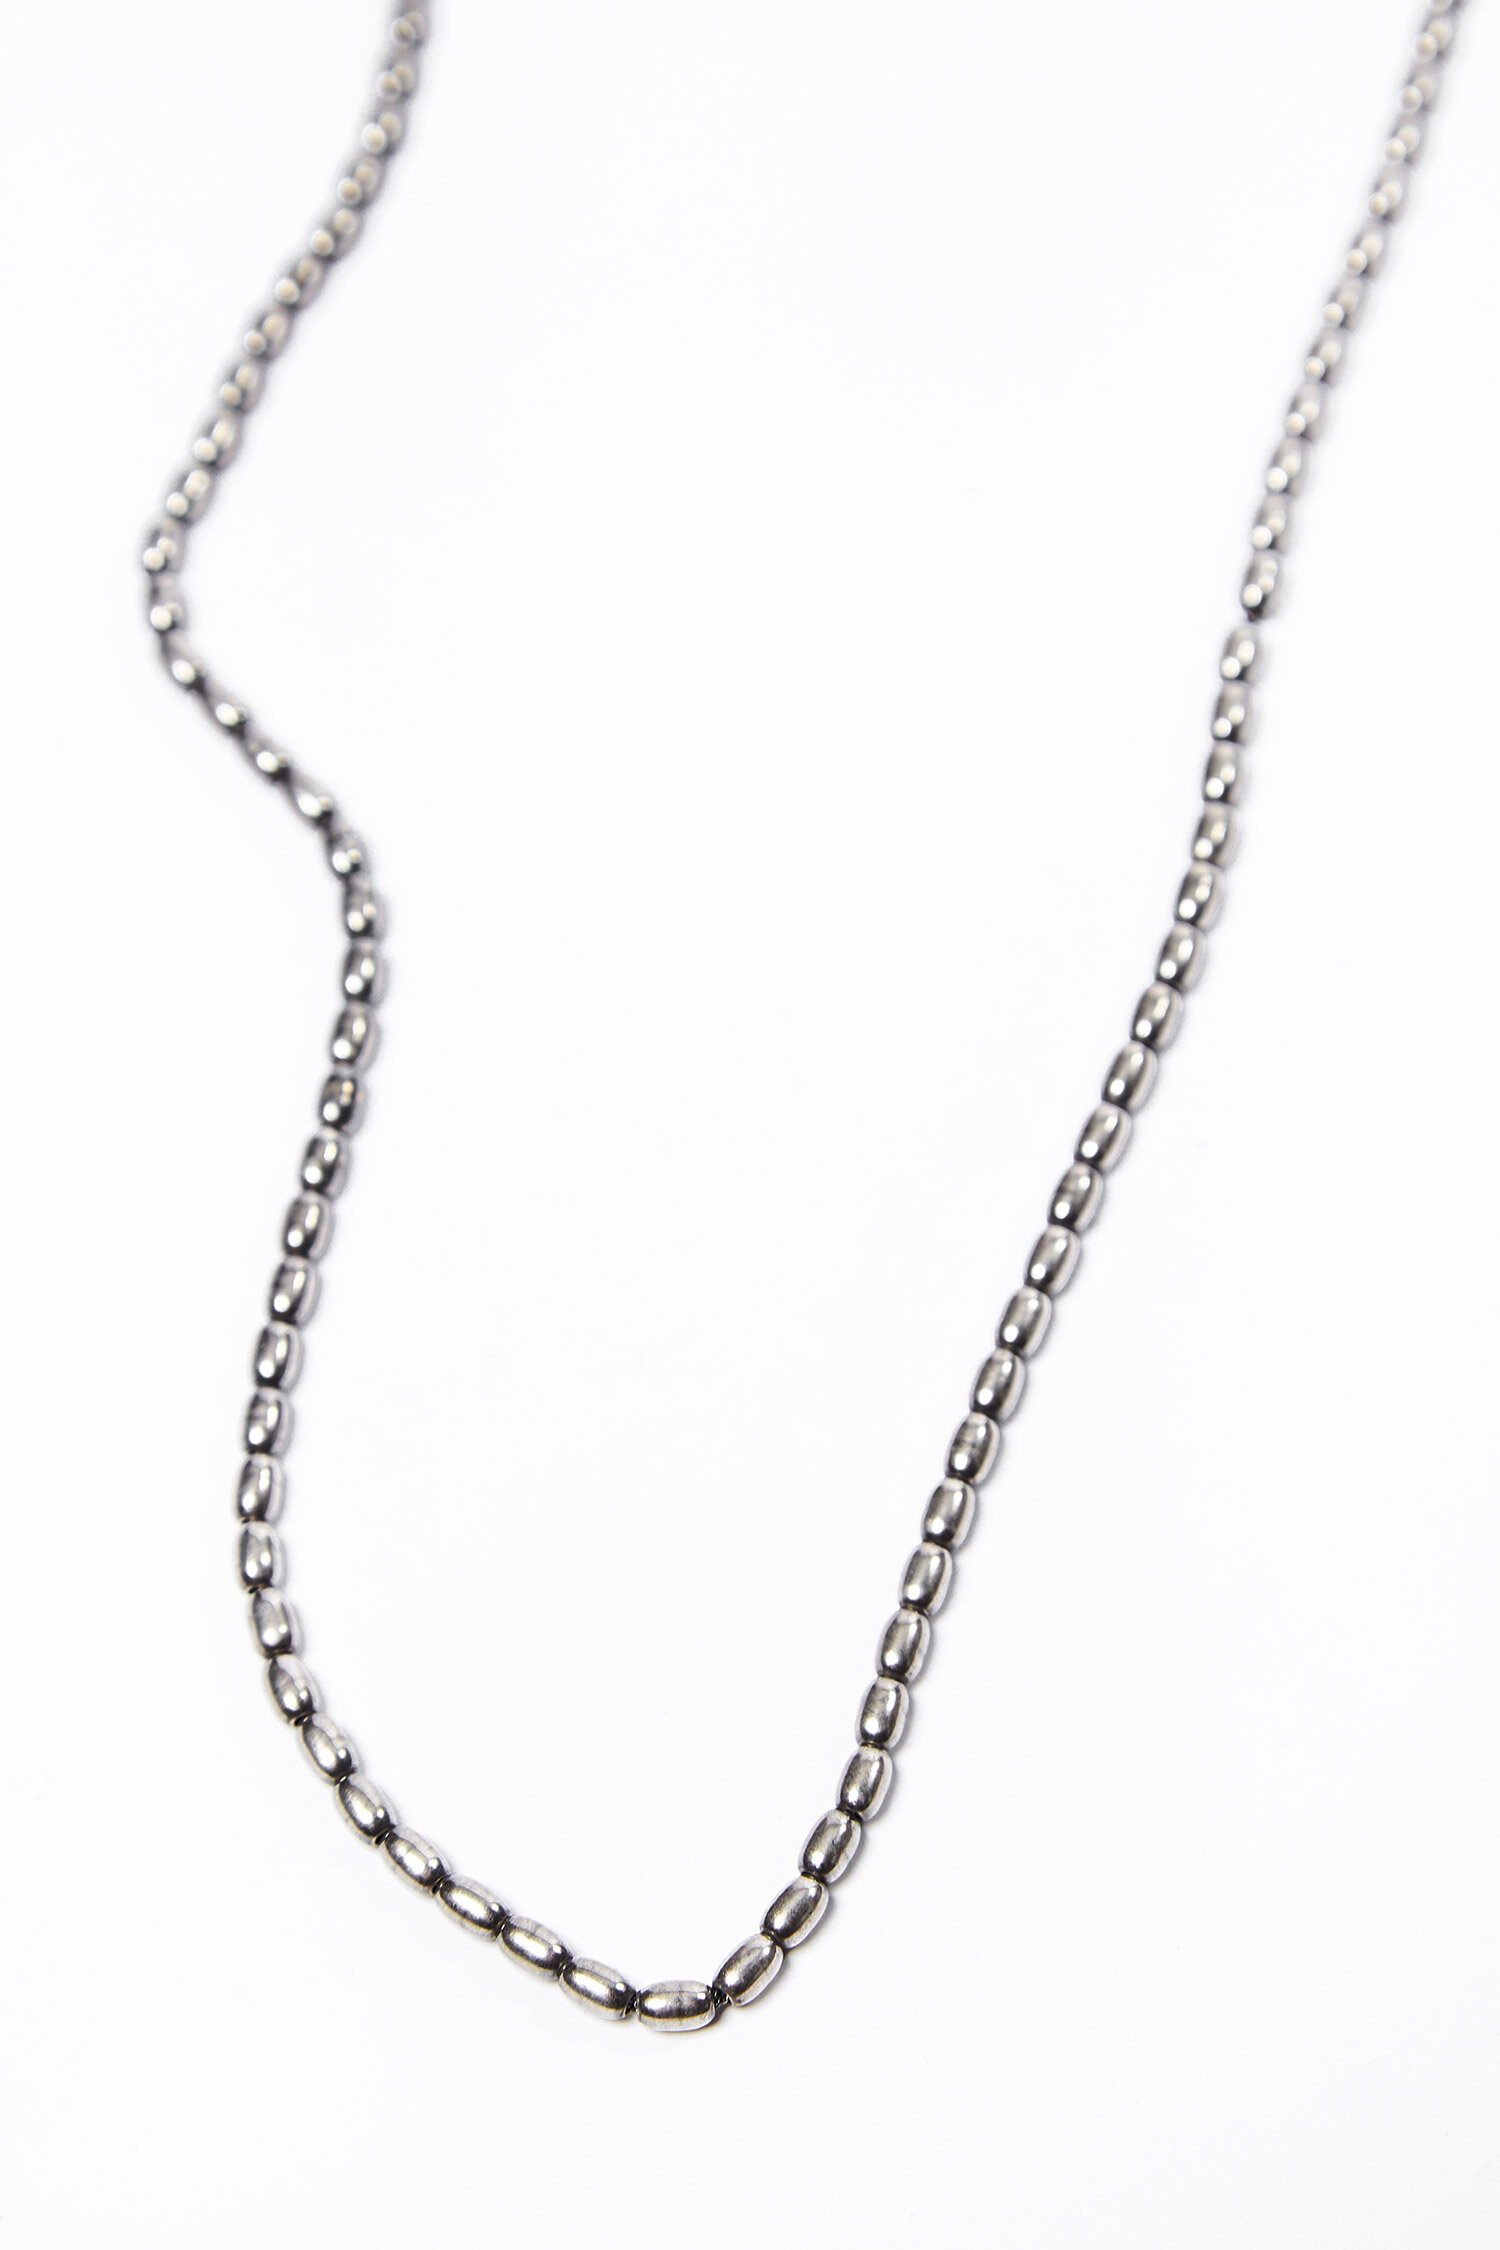 GOTI Long Silver Necklace with 3 Types of Chains — ASIATICA